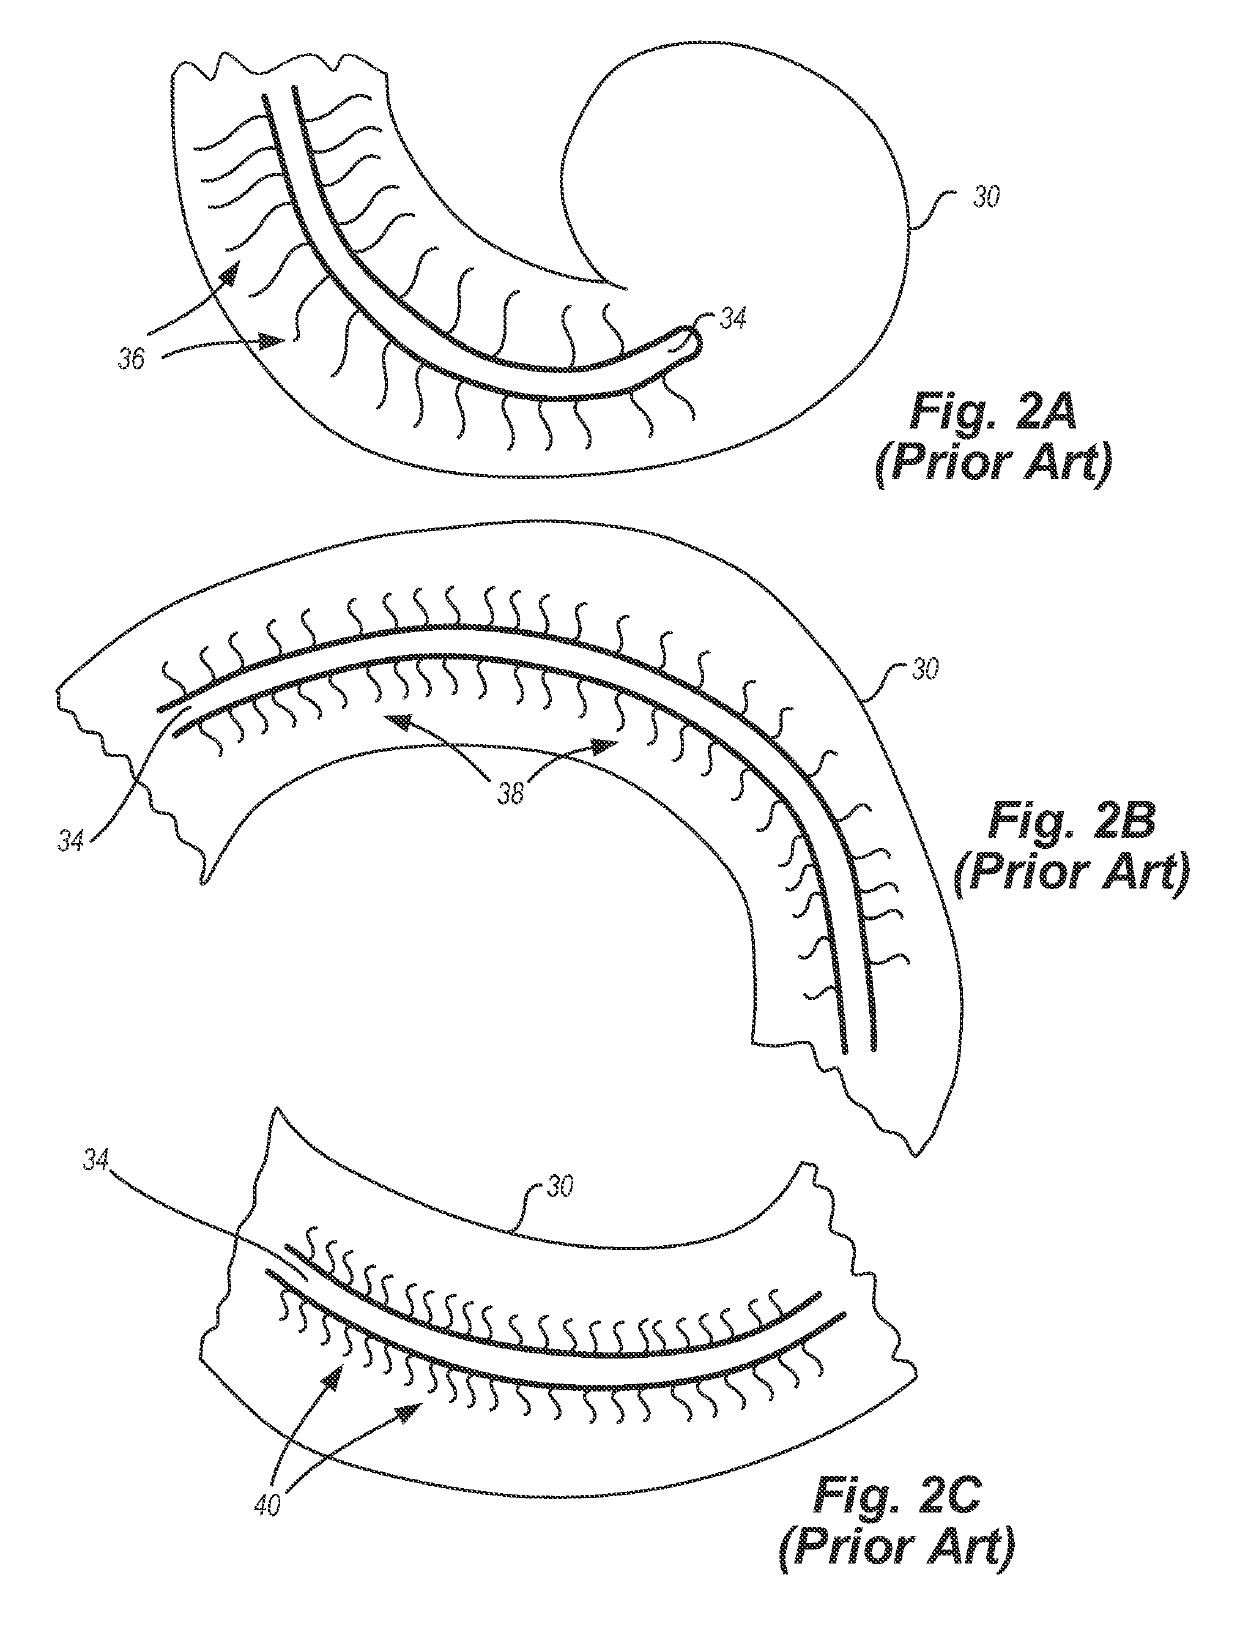 Localized therapeutic hypothermia system, device, and method